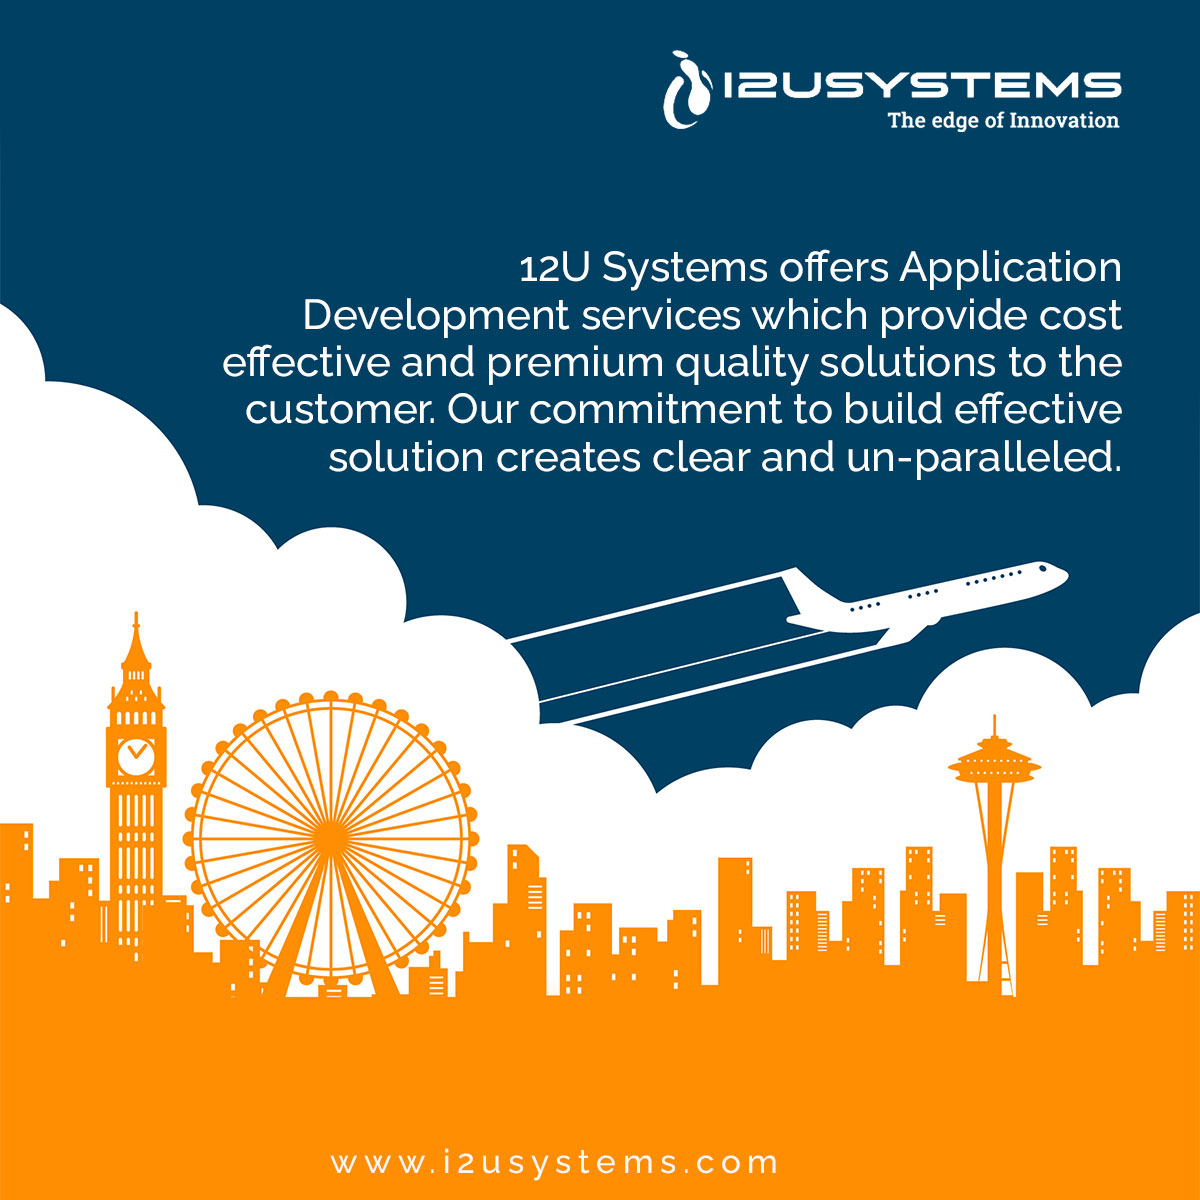 12U Systems offers Application Development services which provide cost effective and premium quality solutions to the customer. #i2usystems #c2crequirements #w2jobs #directclient #benchsales #IOT #application #development #quality #customer #paralleled #commitment